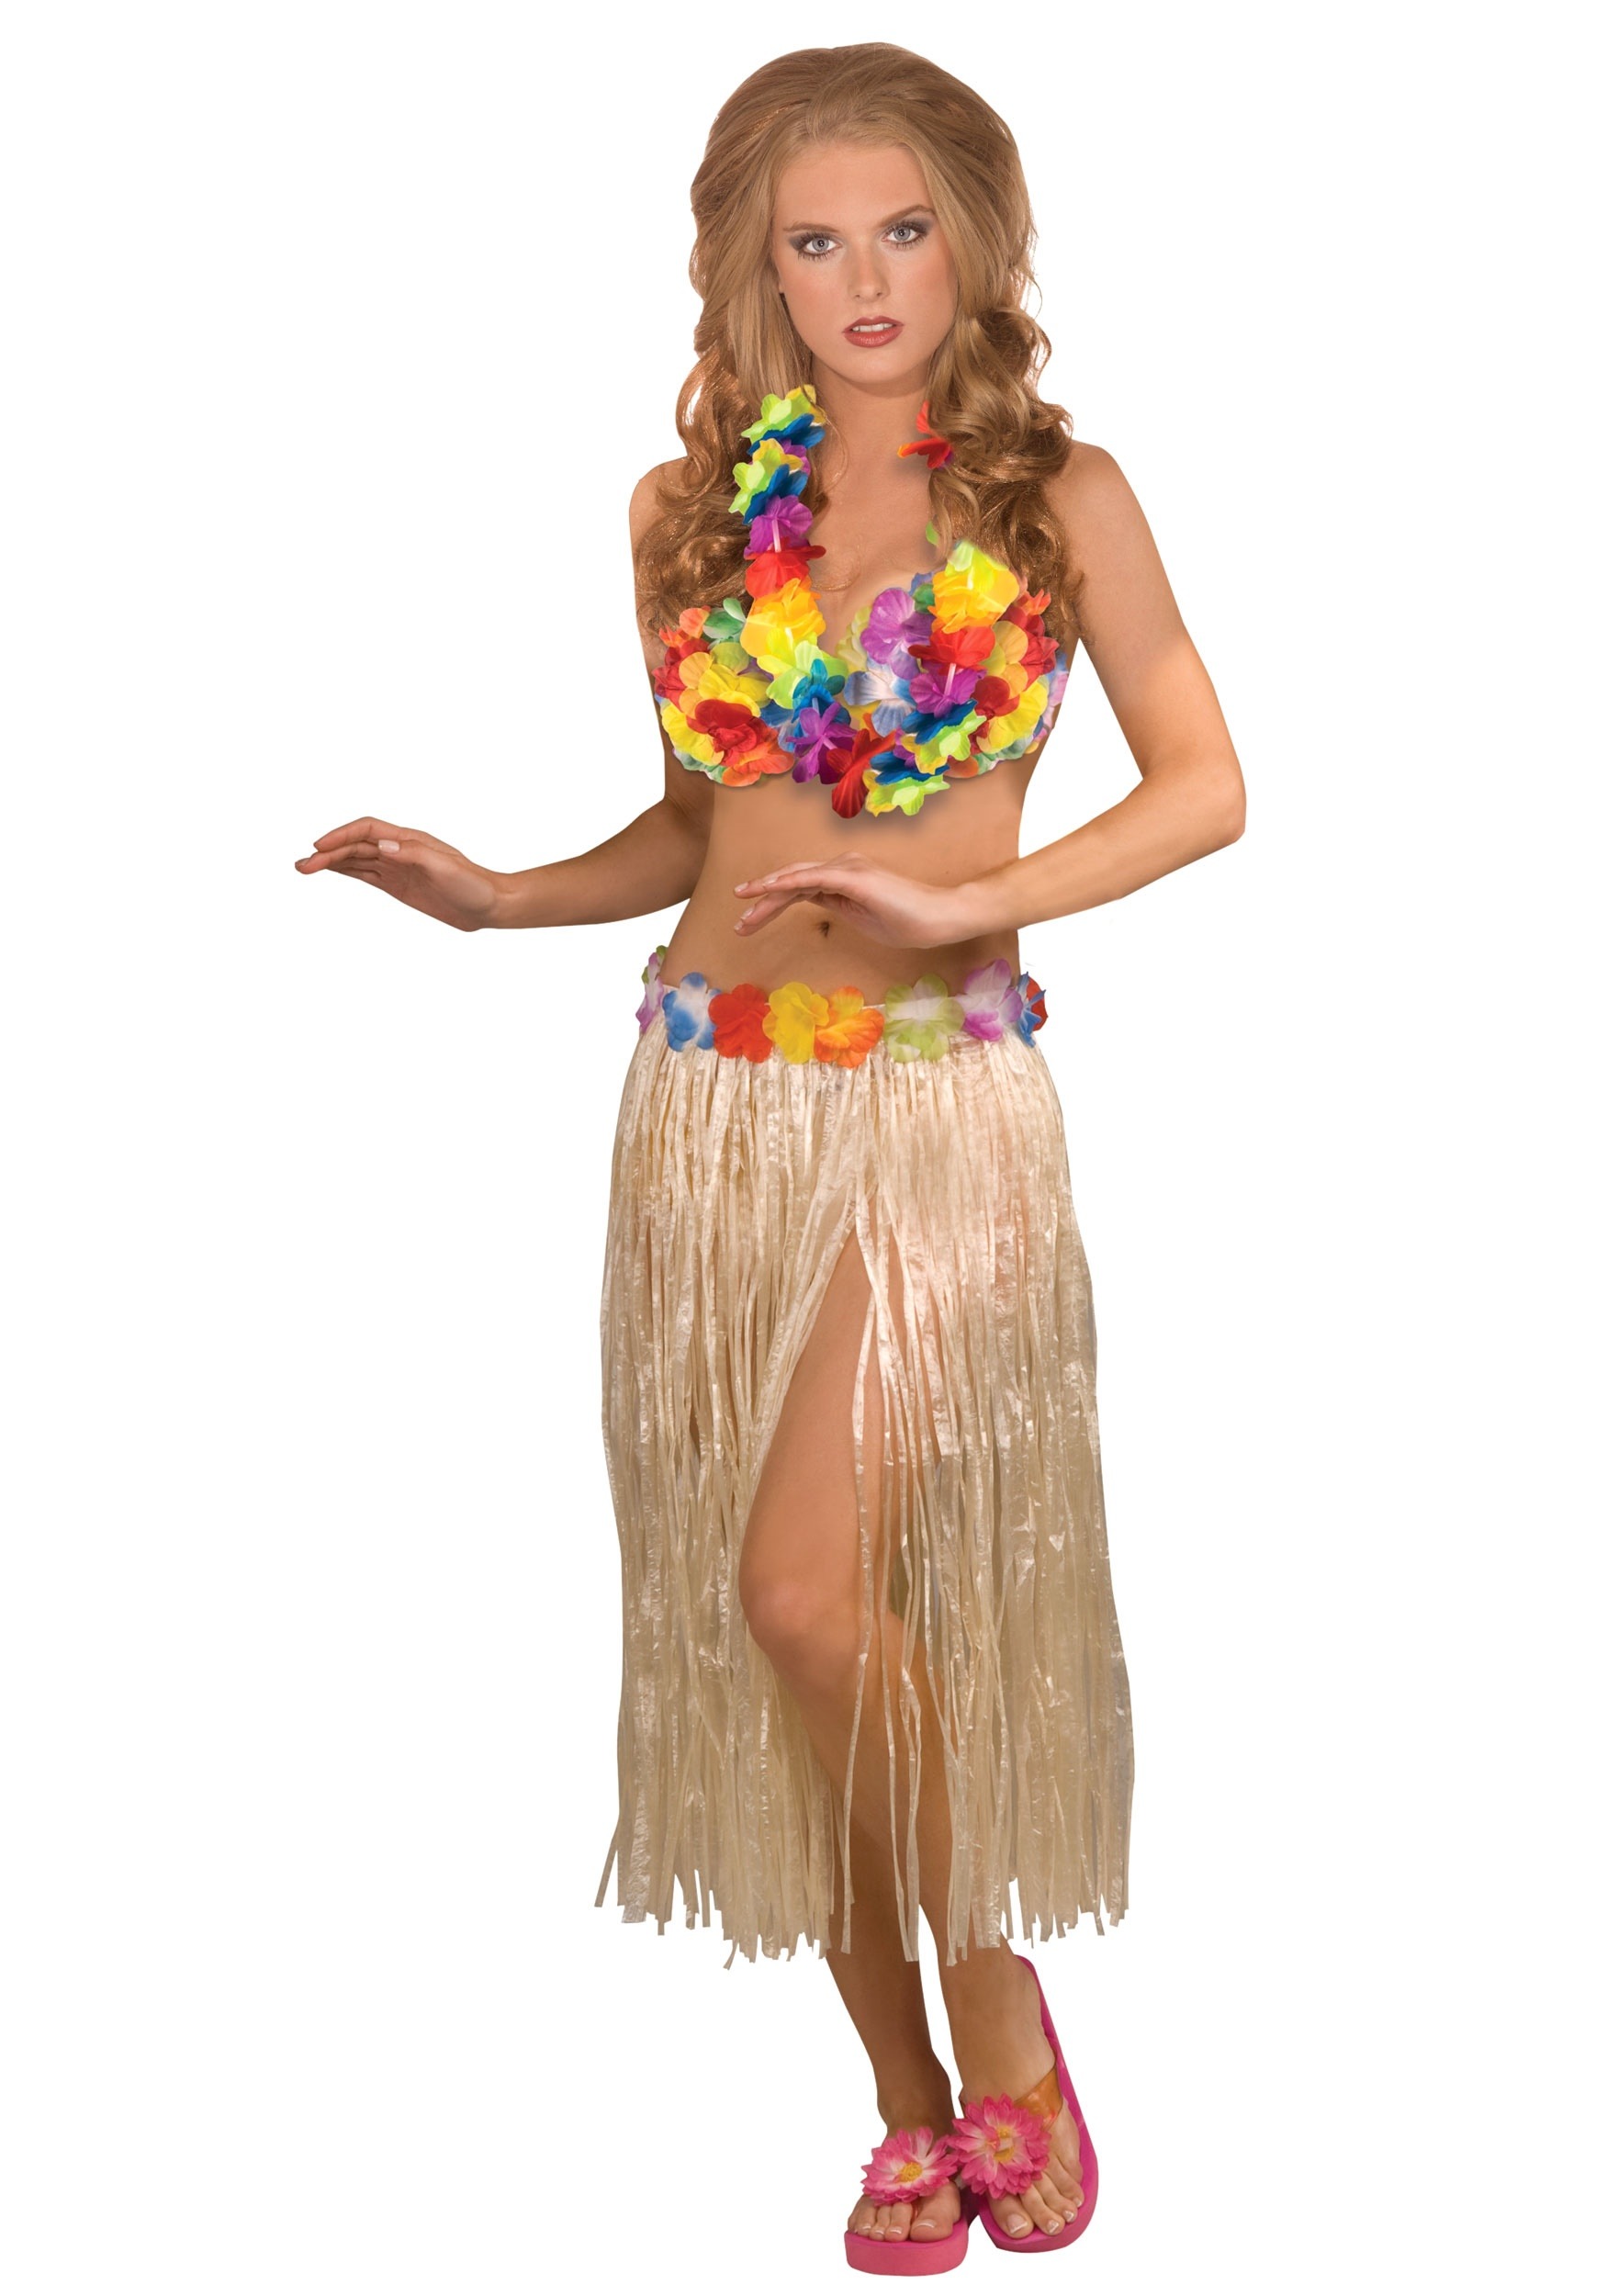 Quick and Easy Halloween Costumes: Grab a coconut bra, grass skirt